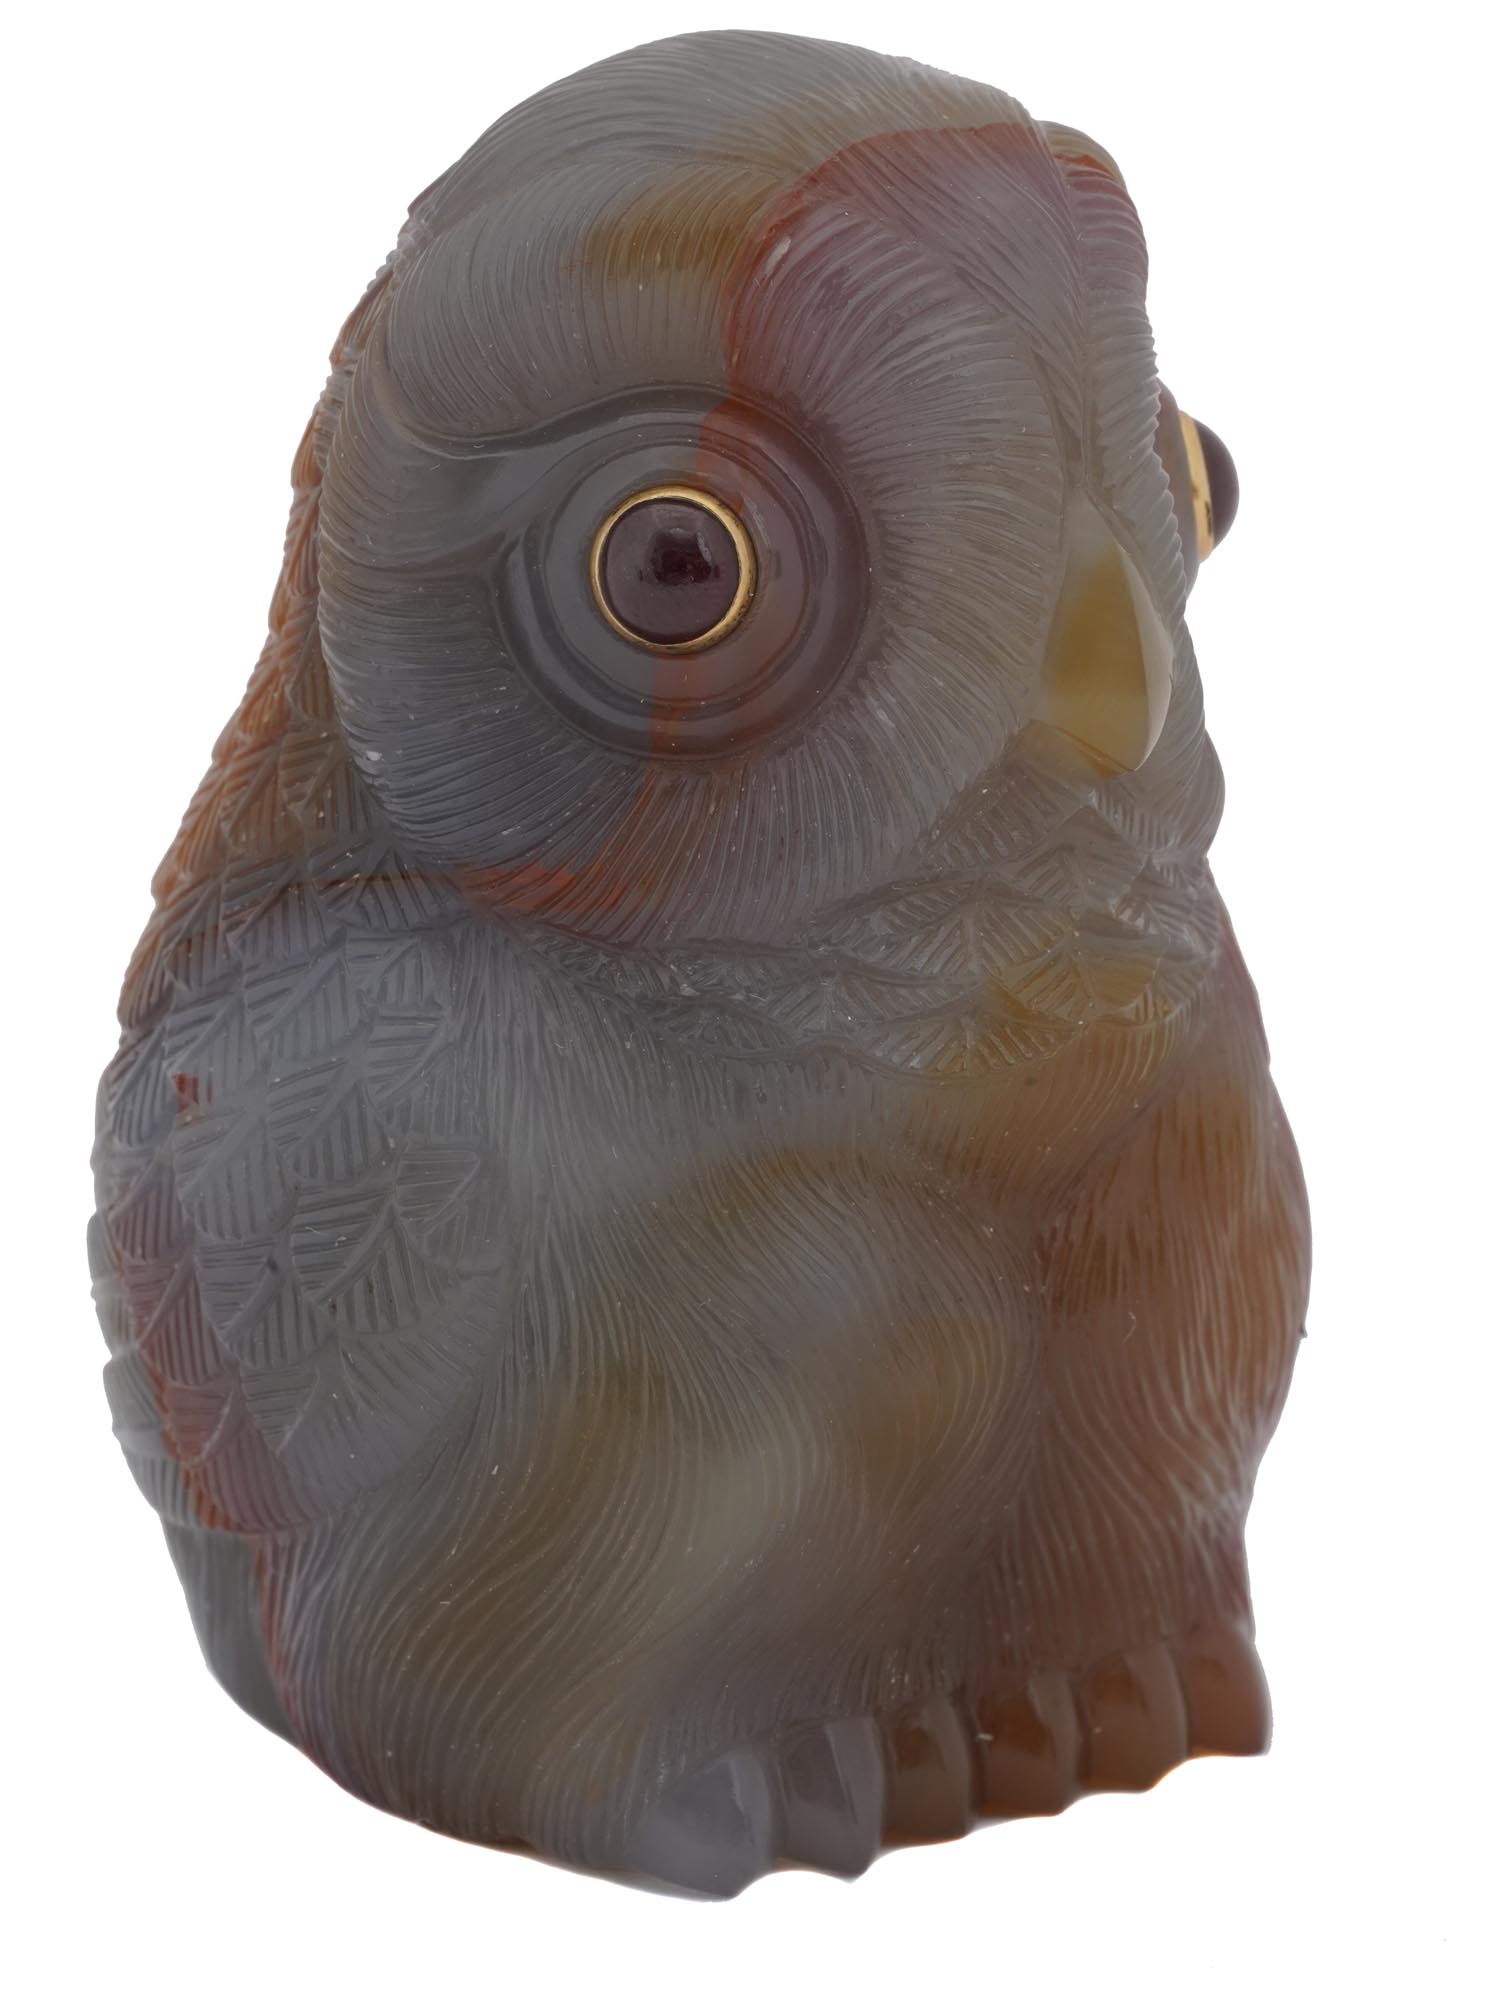 RUSSIAN CARVED AGATE OWL FIGURINE WITH RUBY EYES PIC-0